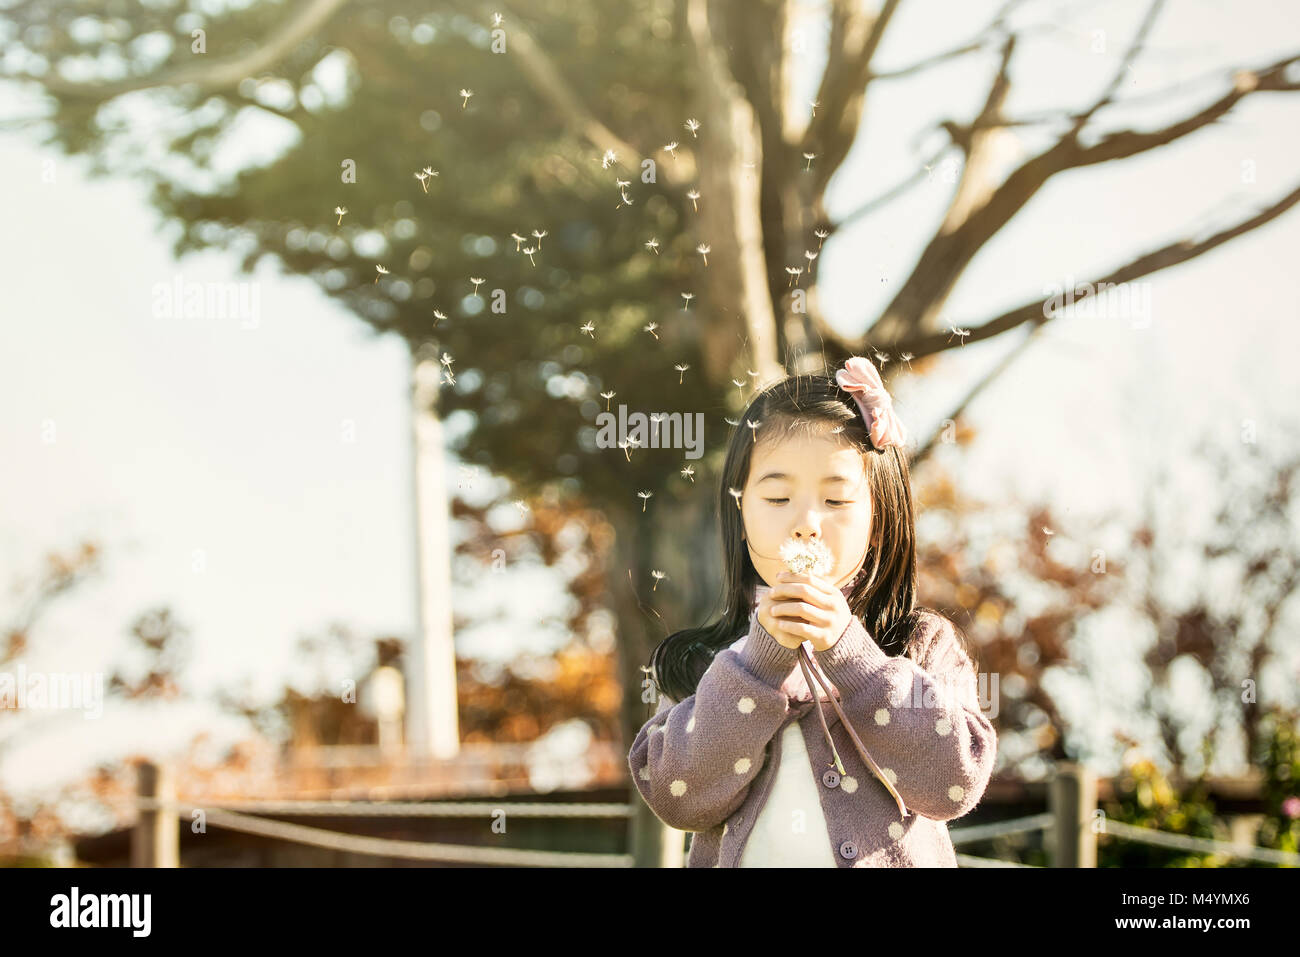 Asia, the child blowing a dandelion in a park. Stock Photo